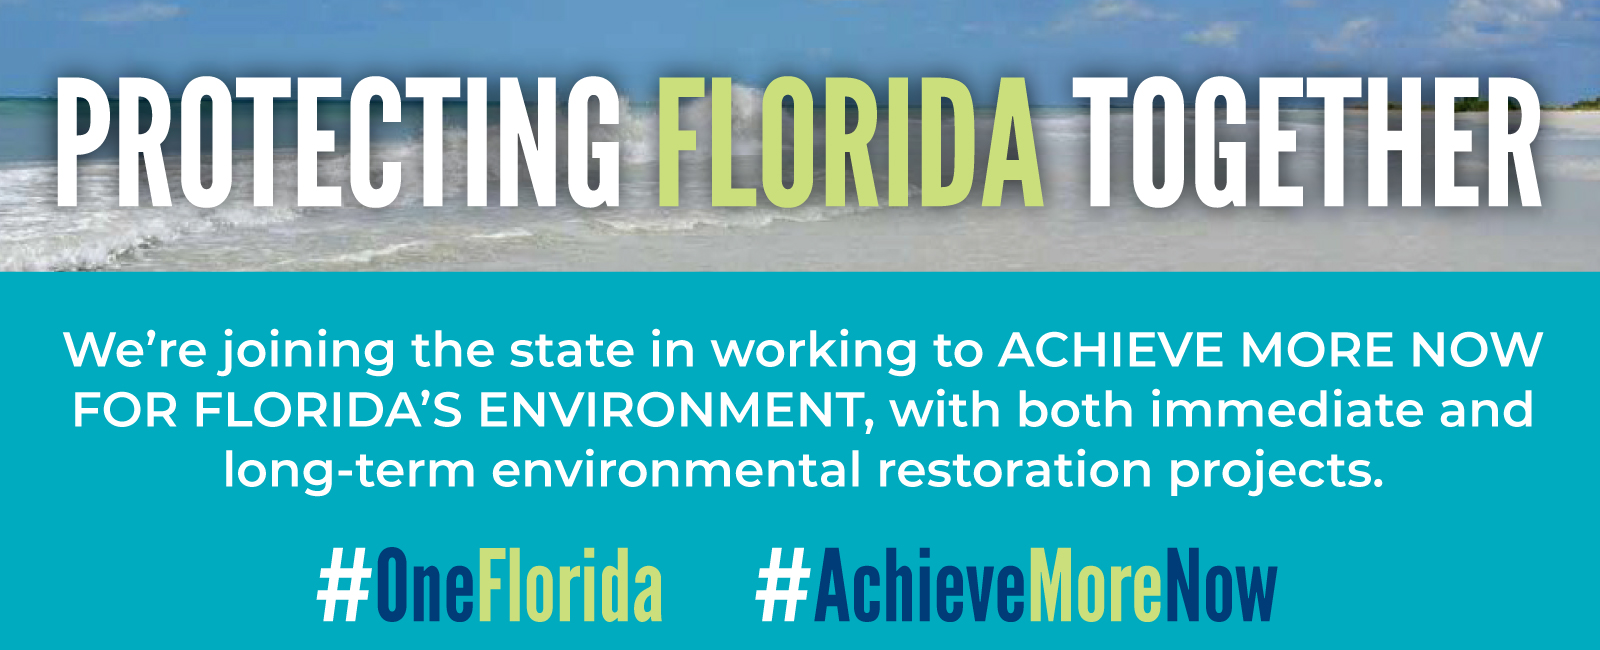 We’re joining the state in working to achieve more for Florida’s environment, with both immediate and long-term environmental restoration projects.